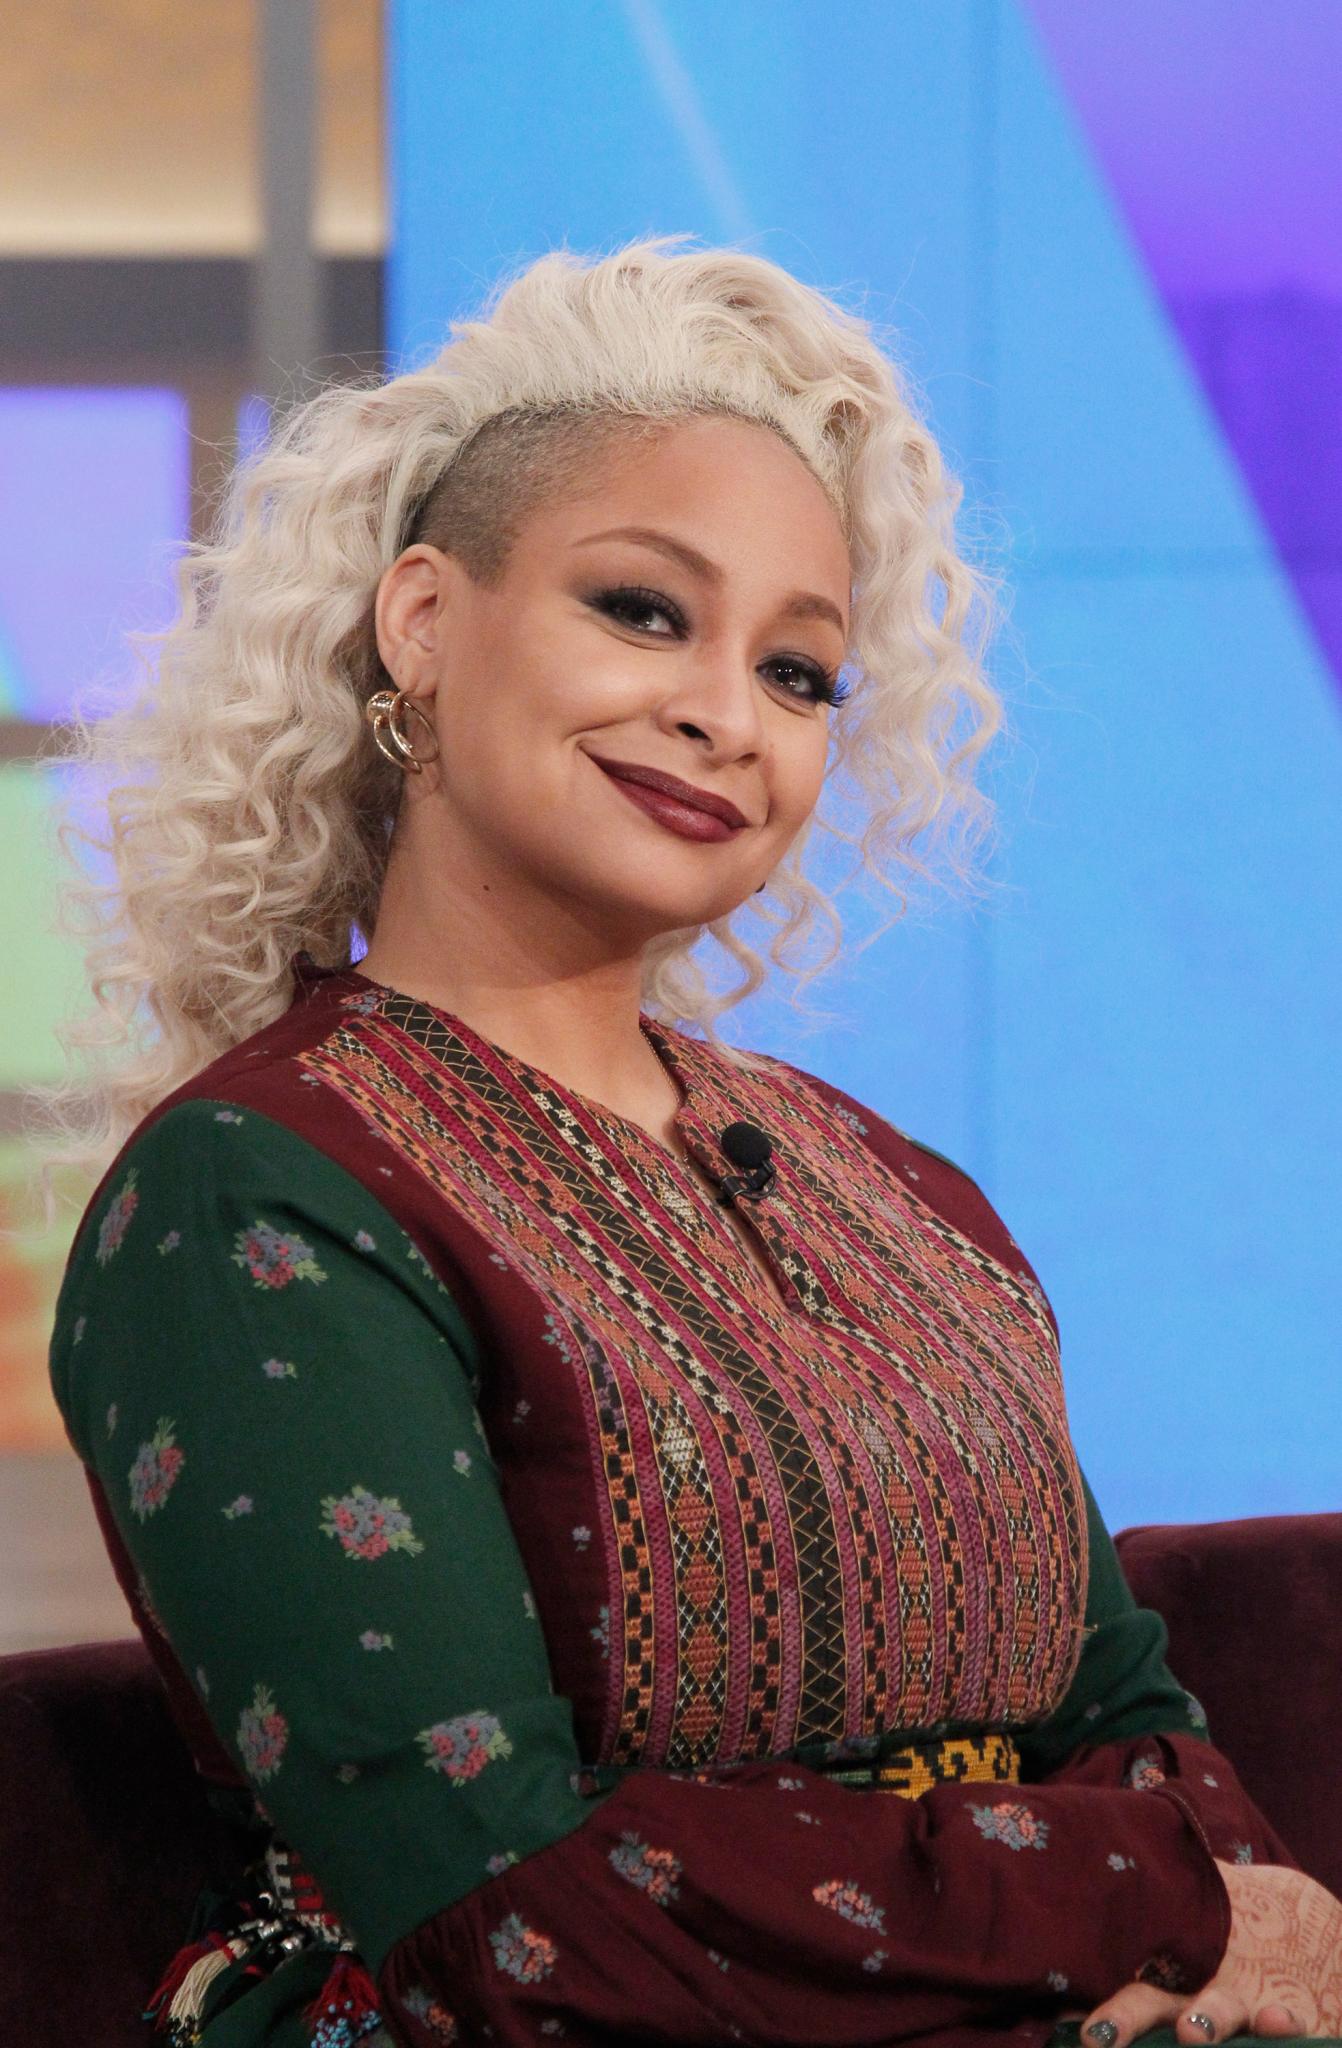 Why Raven-Symone Leaving 'The View' Is The Best Thing That Could Happen
